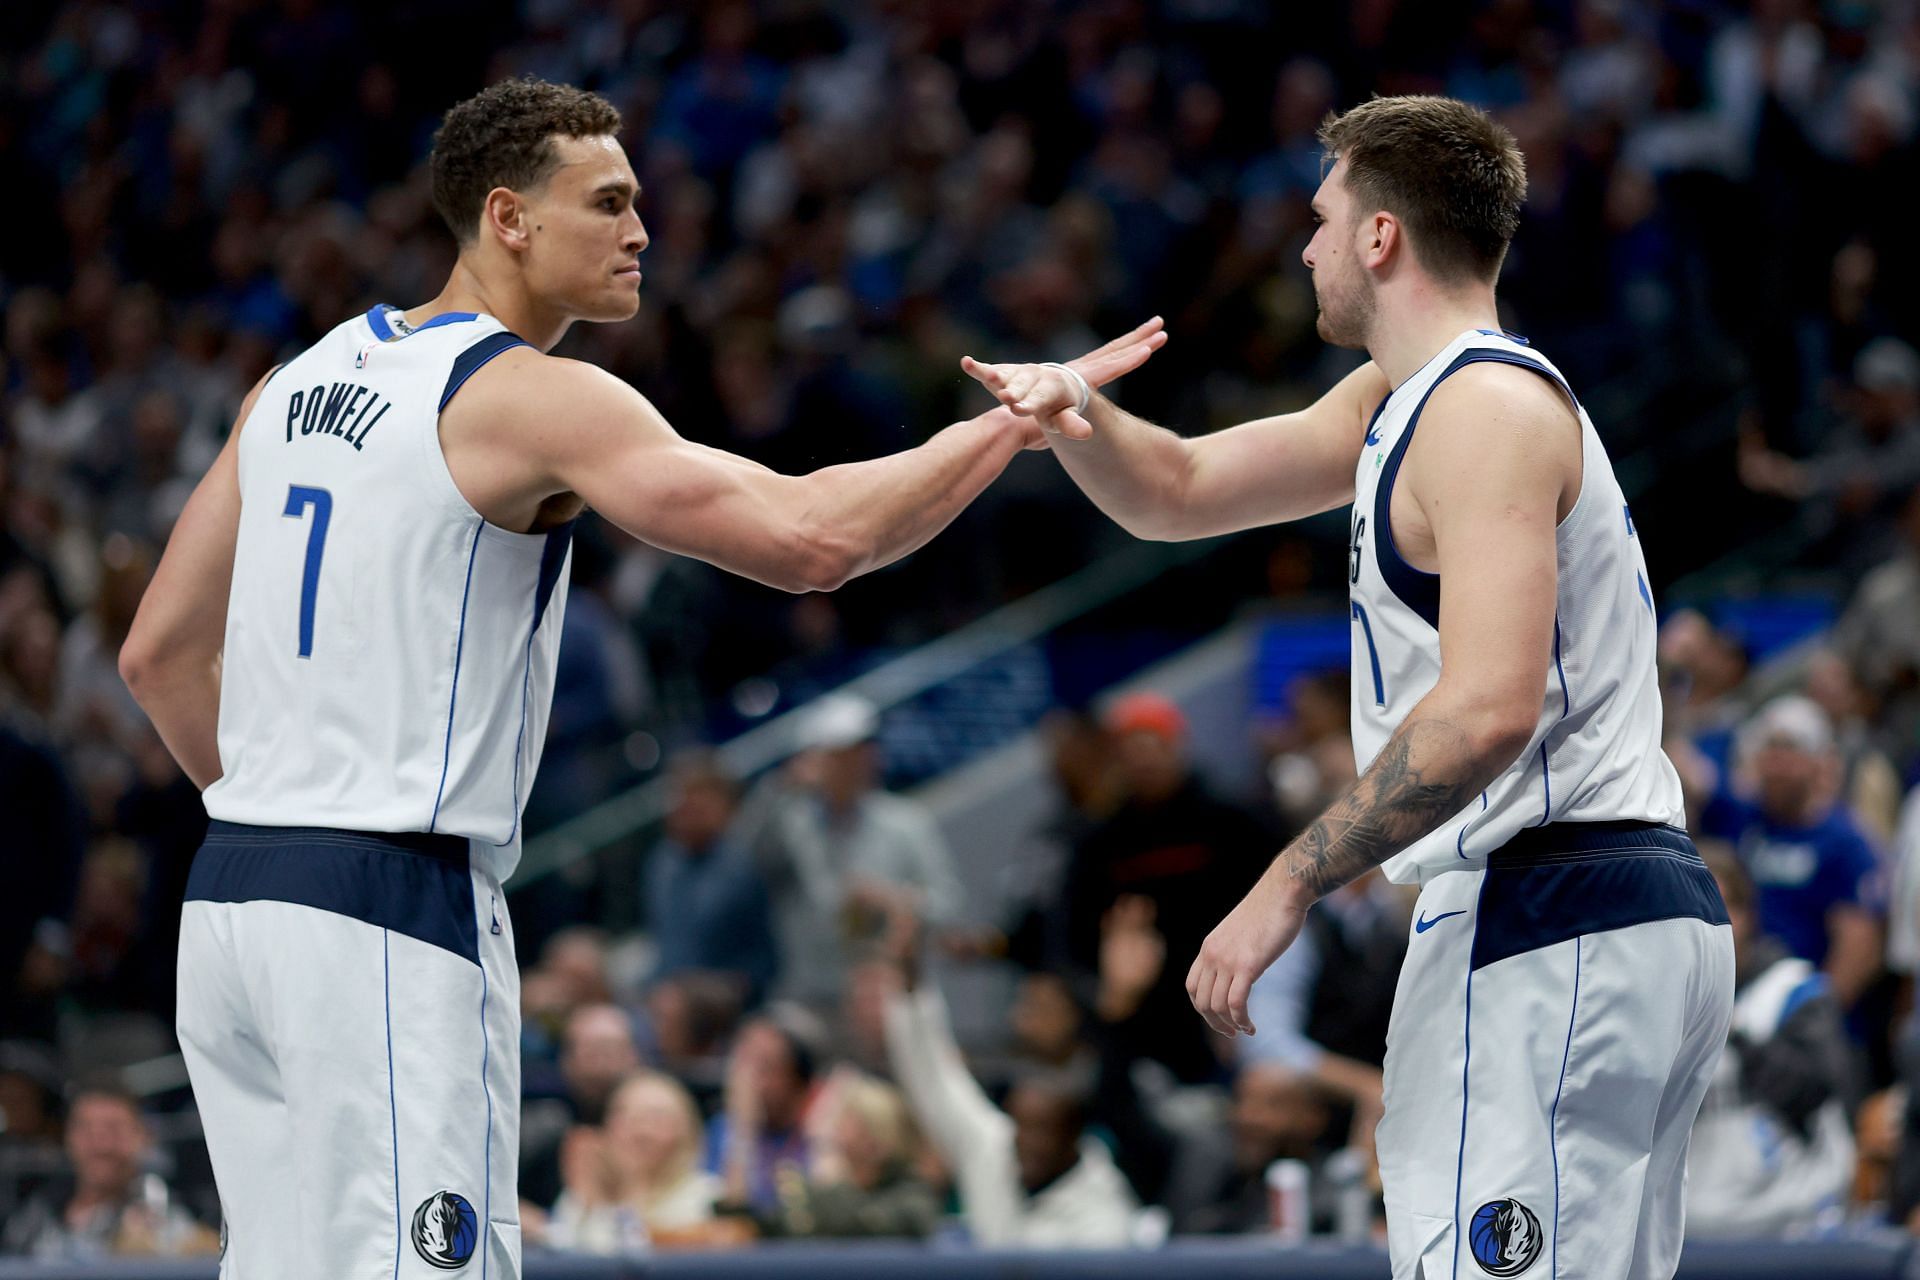 Luka Doncic celebrates with Dwight Powell #7 of the Dallas Mavericks